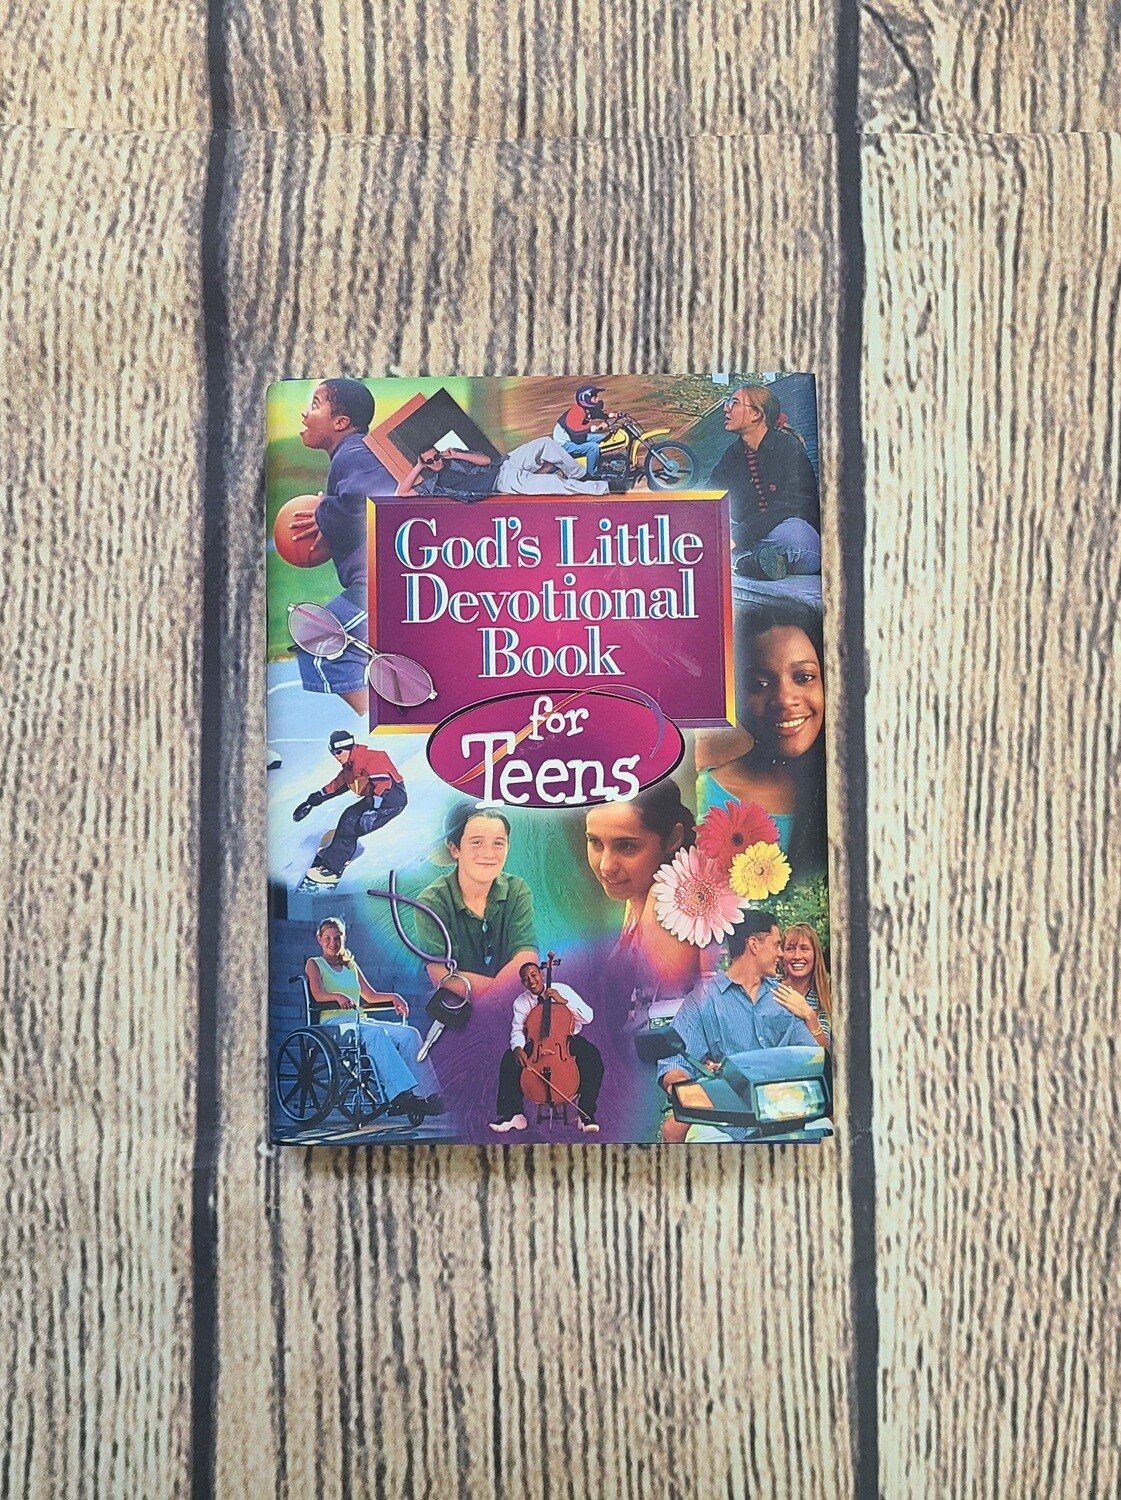 God's Little Devotional Book for Teens by Honor Books